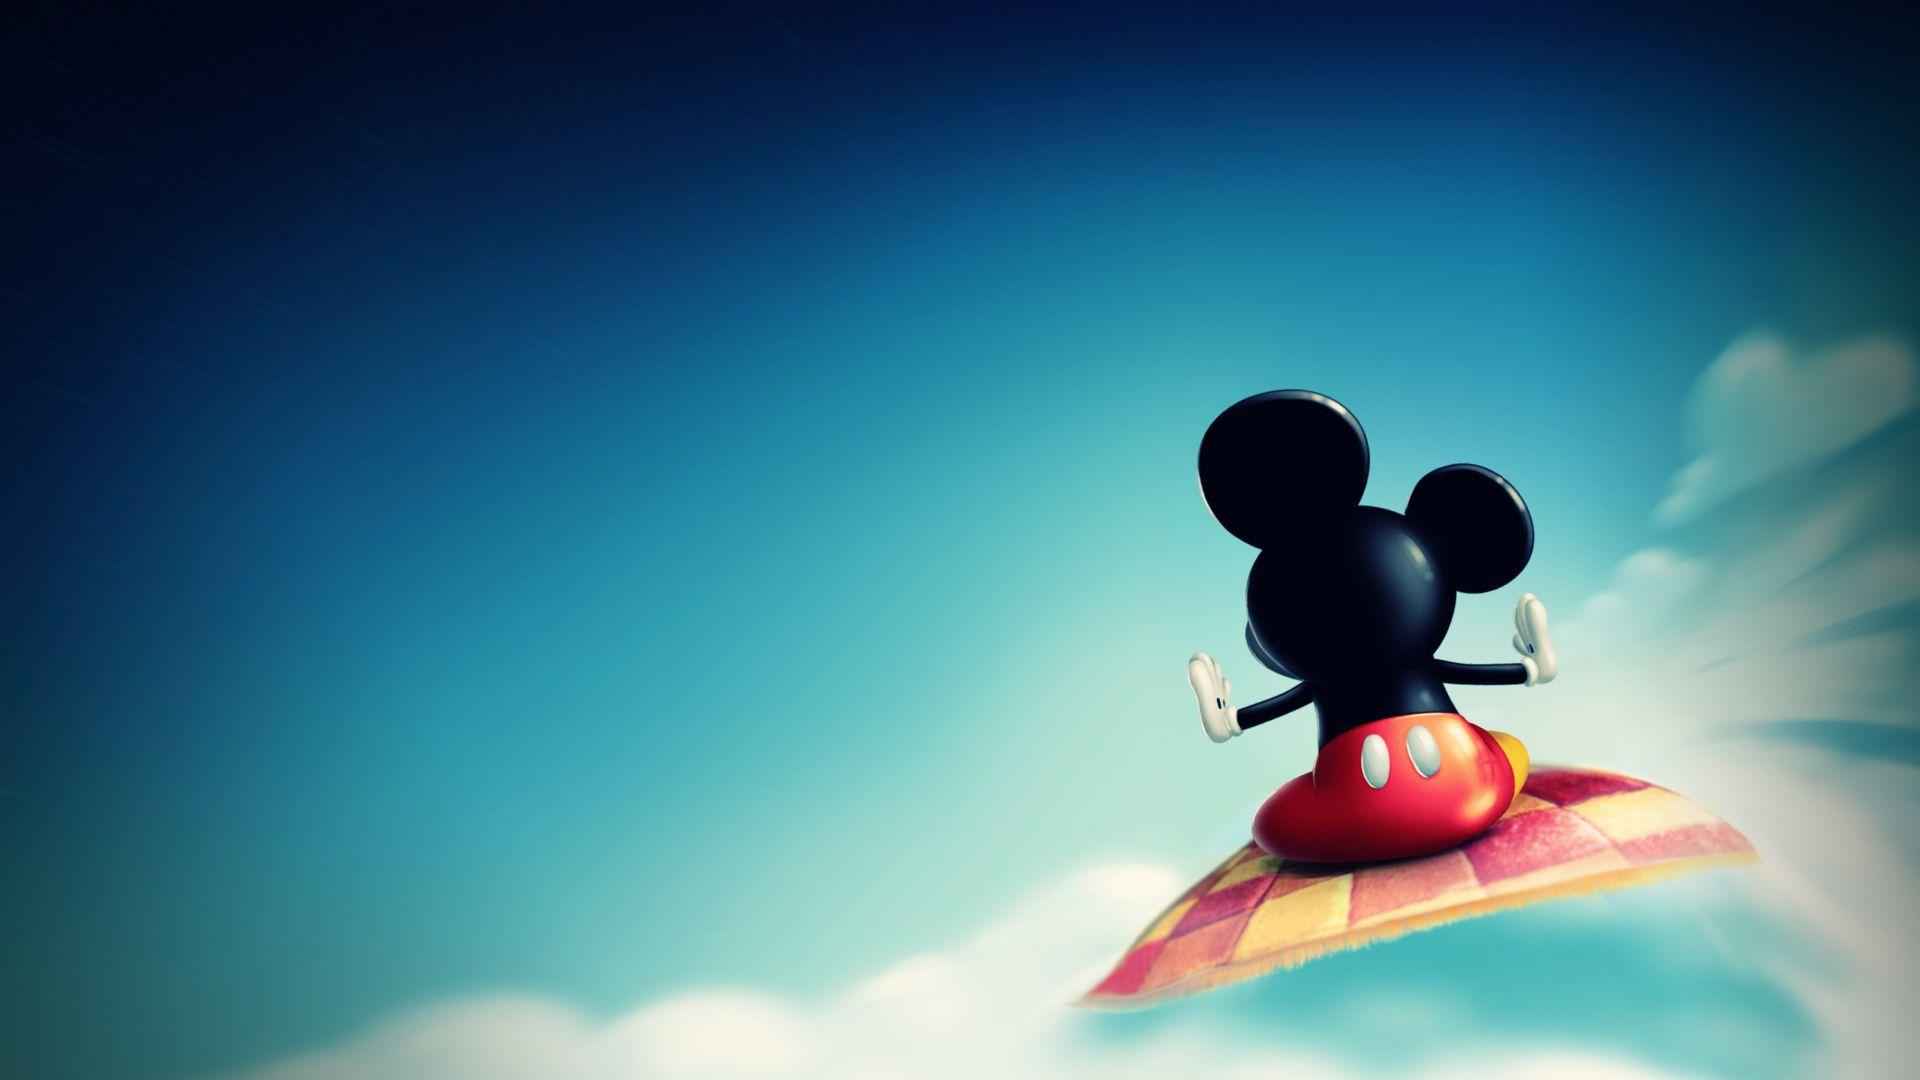 Disney Wallpaper Background. Mickey mouse wallpaper